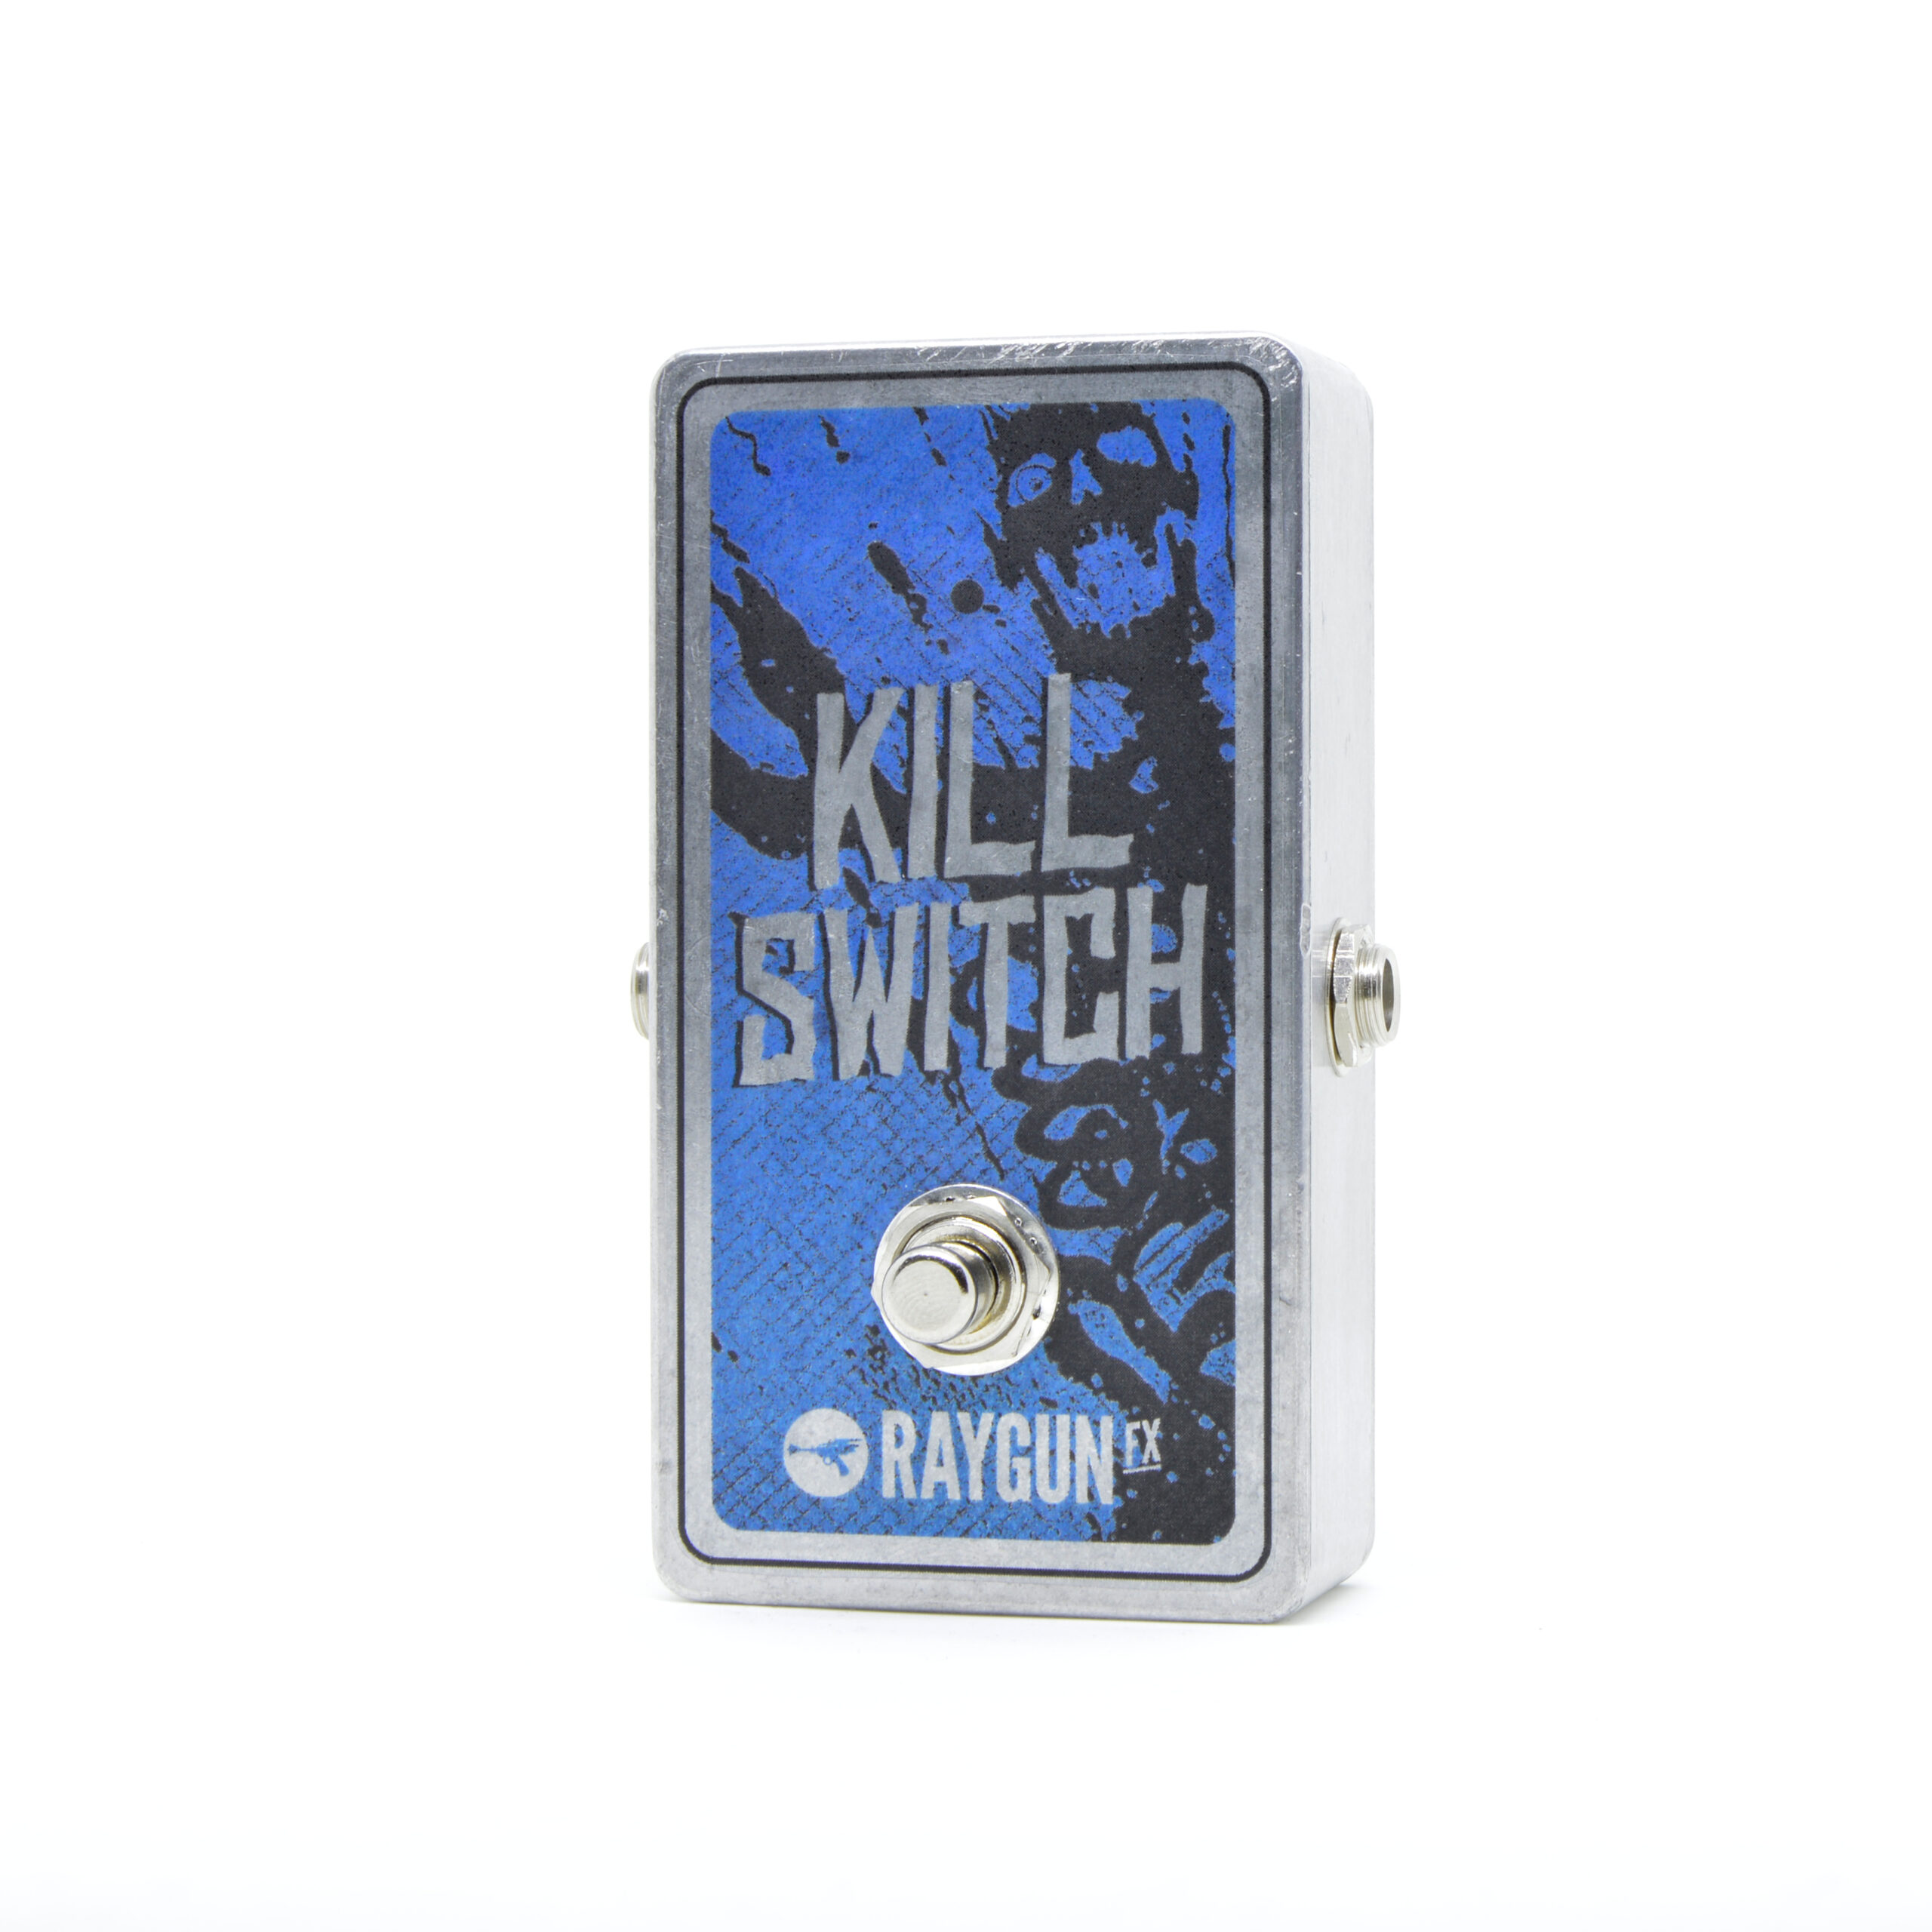 https://fuzzboxes.co.uk/wp-content/uploads/2017/10/Raygun-fx-_0017_killswitch-b-scaled.jpg